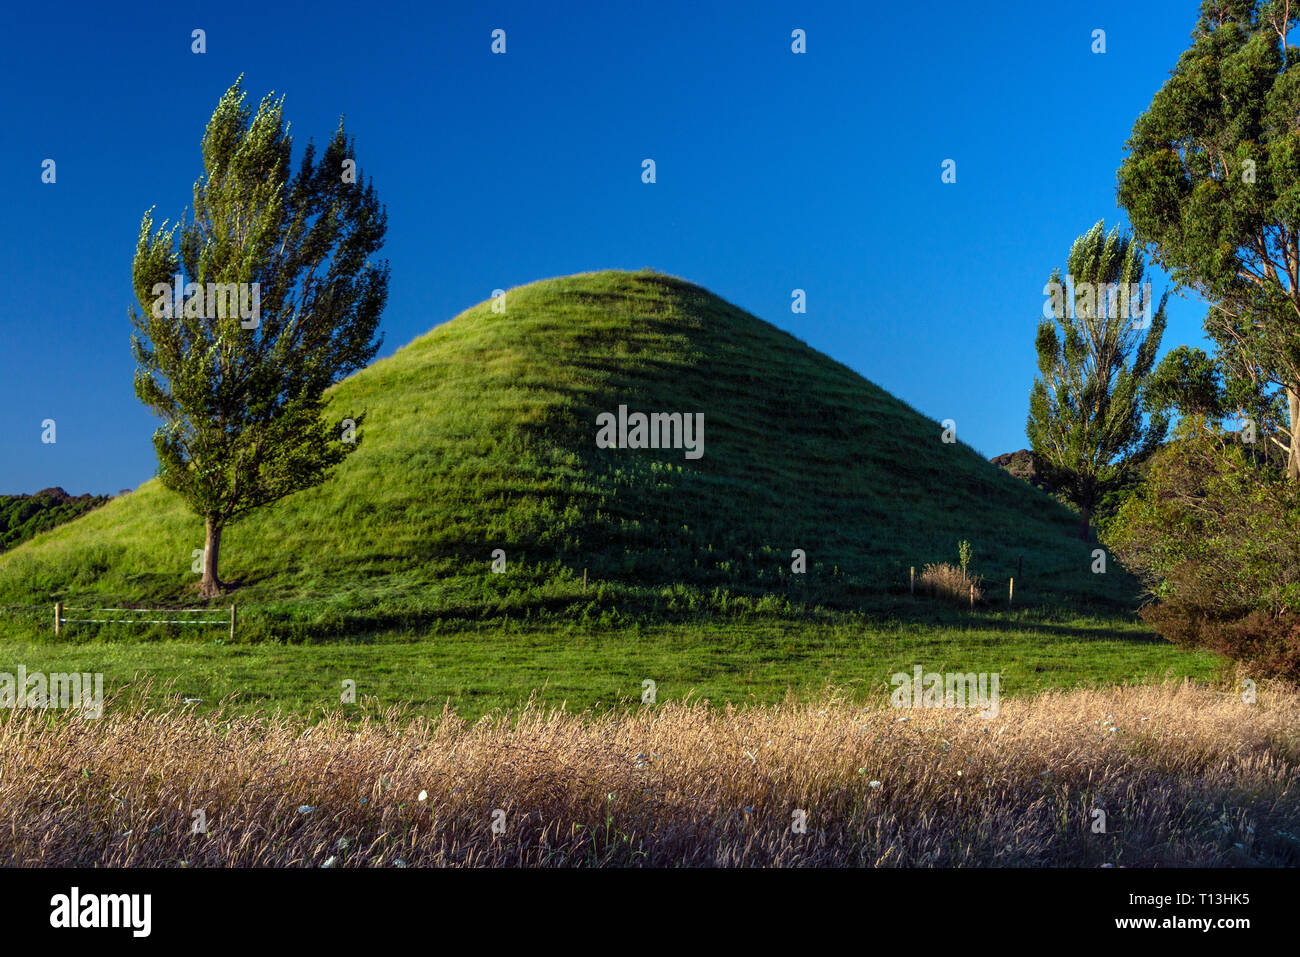 One of many natural pyramid type mounds made from river silt, overgrown with lush grass. These can be seen throughout the North Island of New Zealand. Stock Photo